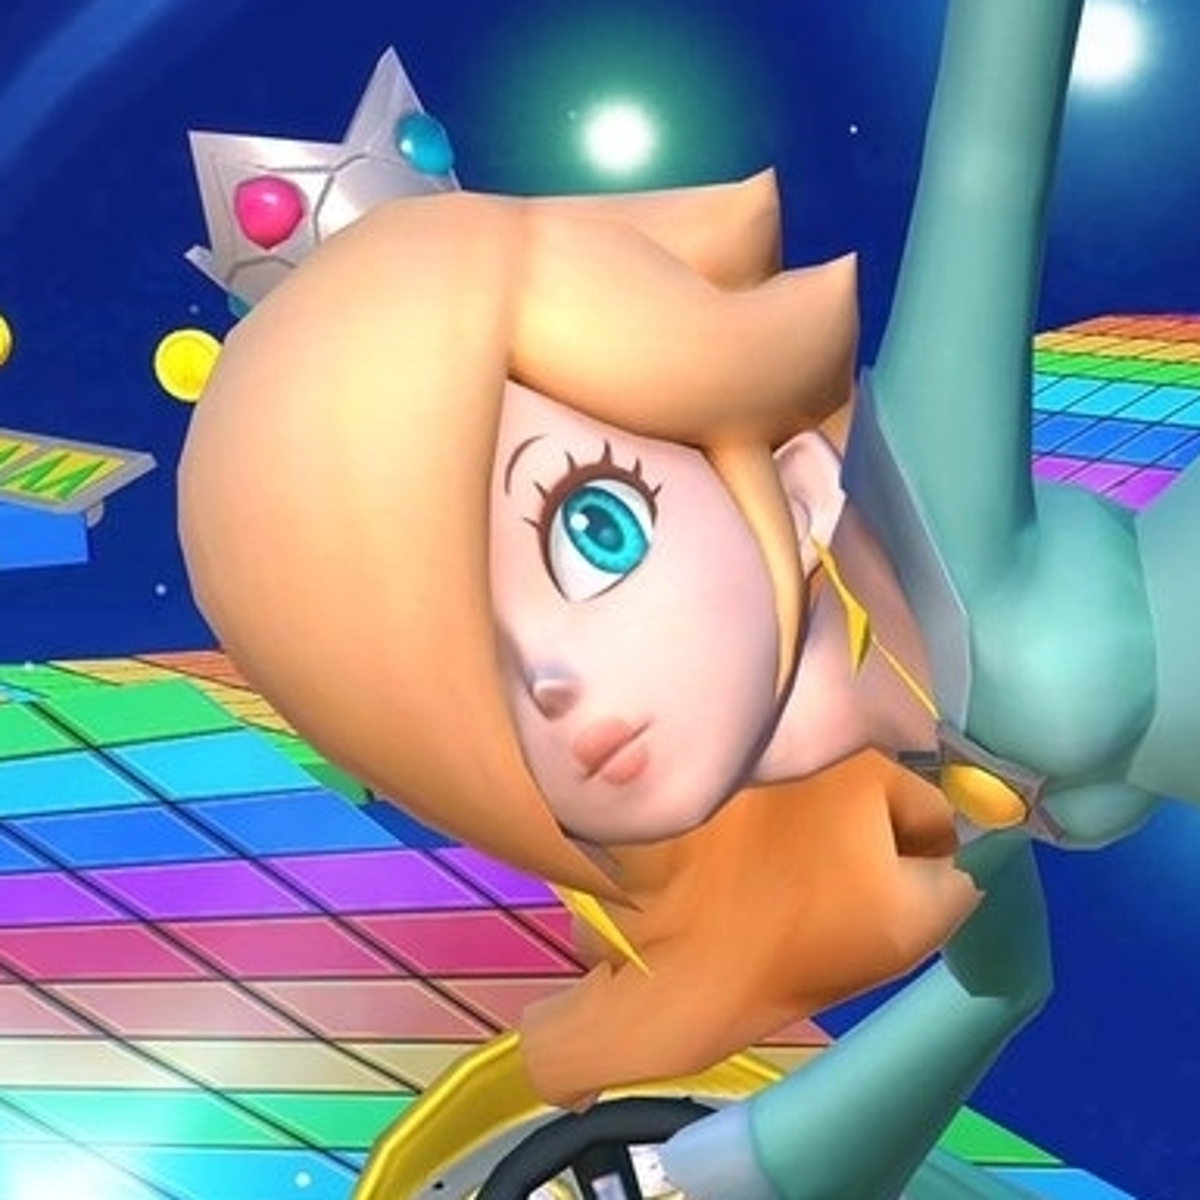 Mario Kart (Tour) News on X: Cat Rosalina from joins the race next Tour!  What do you think of her joining the game? #MarioKartTour #MarioKart  Picture by: Nintendo  / X